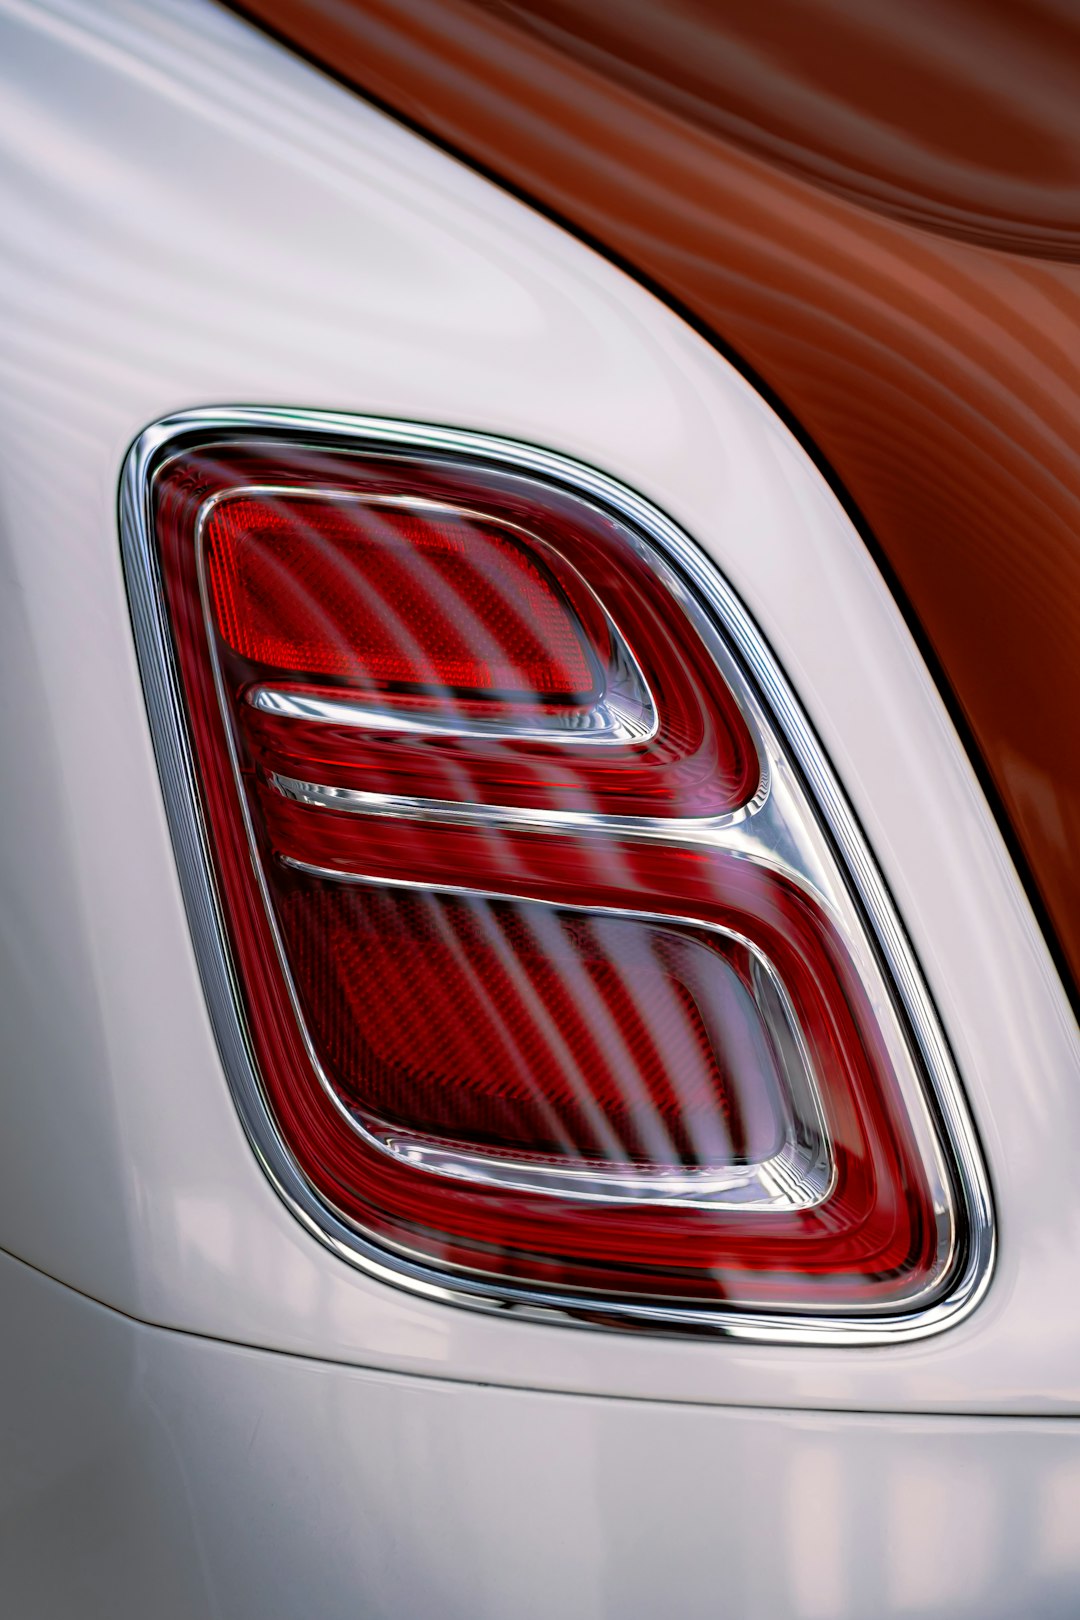 orange and silver car tail light